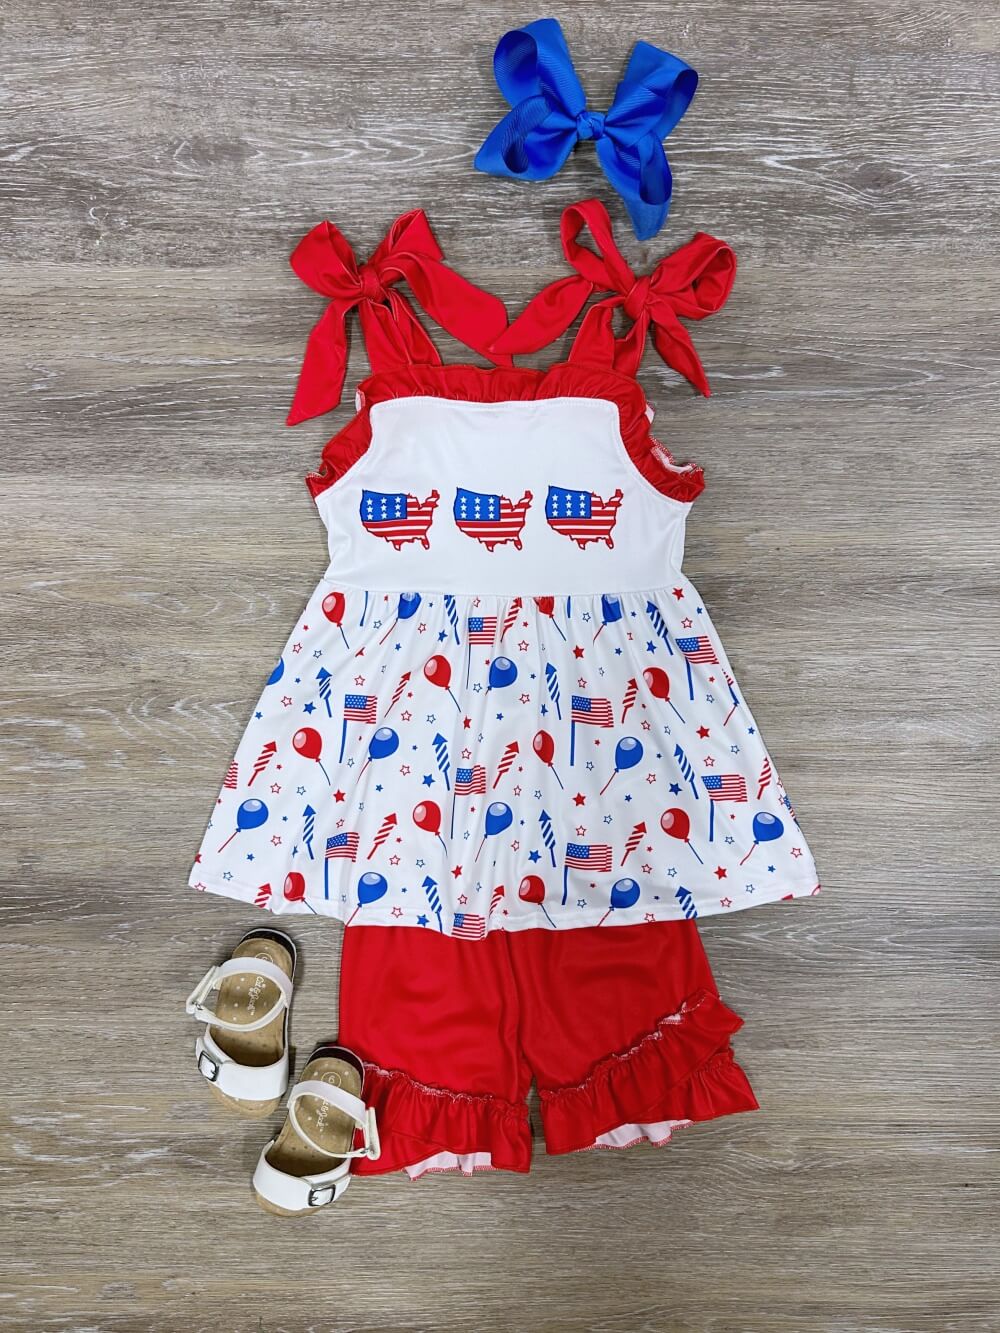 Across America Girls Red Ruffle Bow Tank Shorts Outfit - Sydney So Sweet